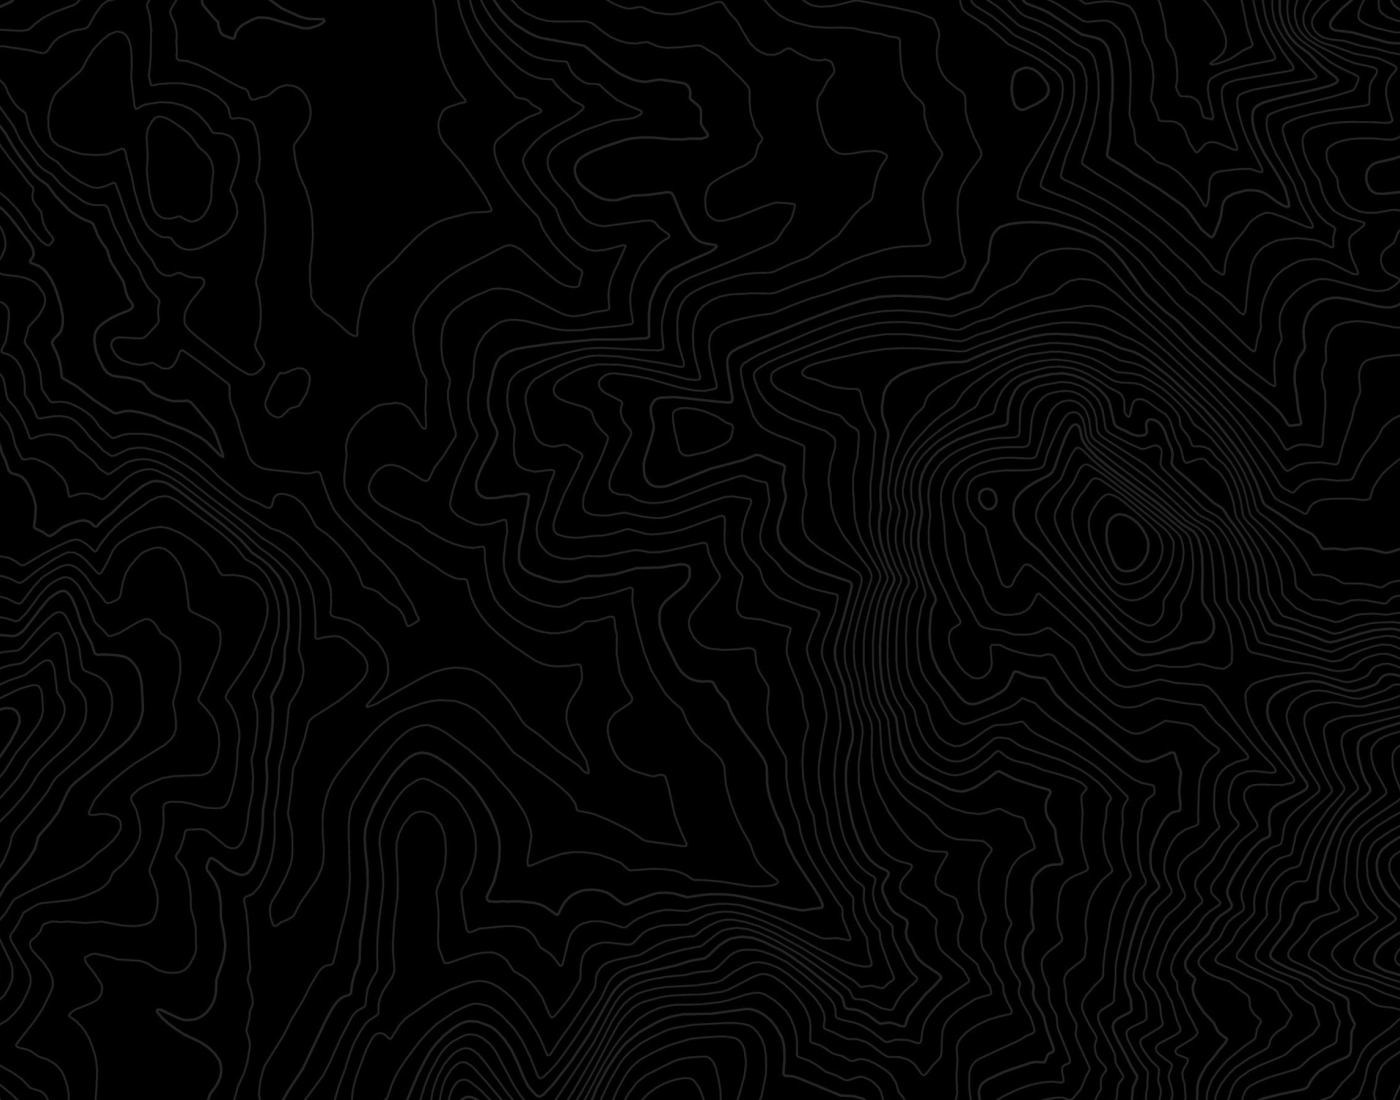 1400x1100 Topography Abstract Black Texture 1400x1100 Resolution Wallpaper Hd Abstract 4k 9522